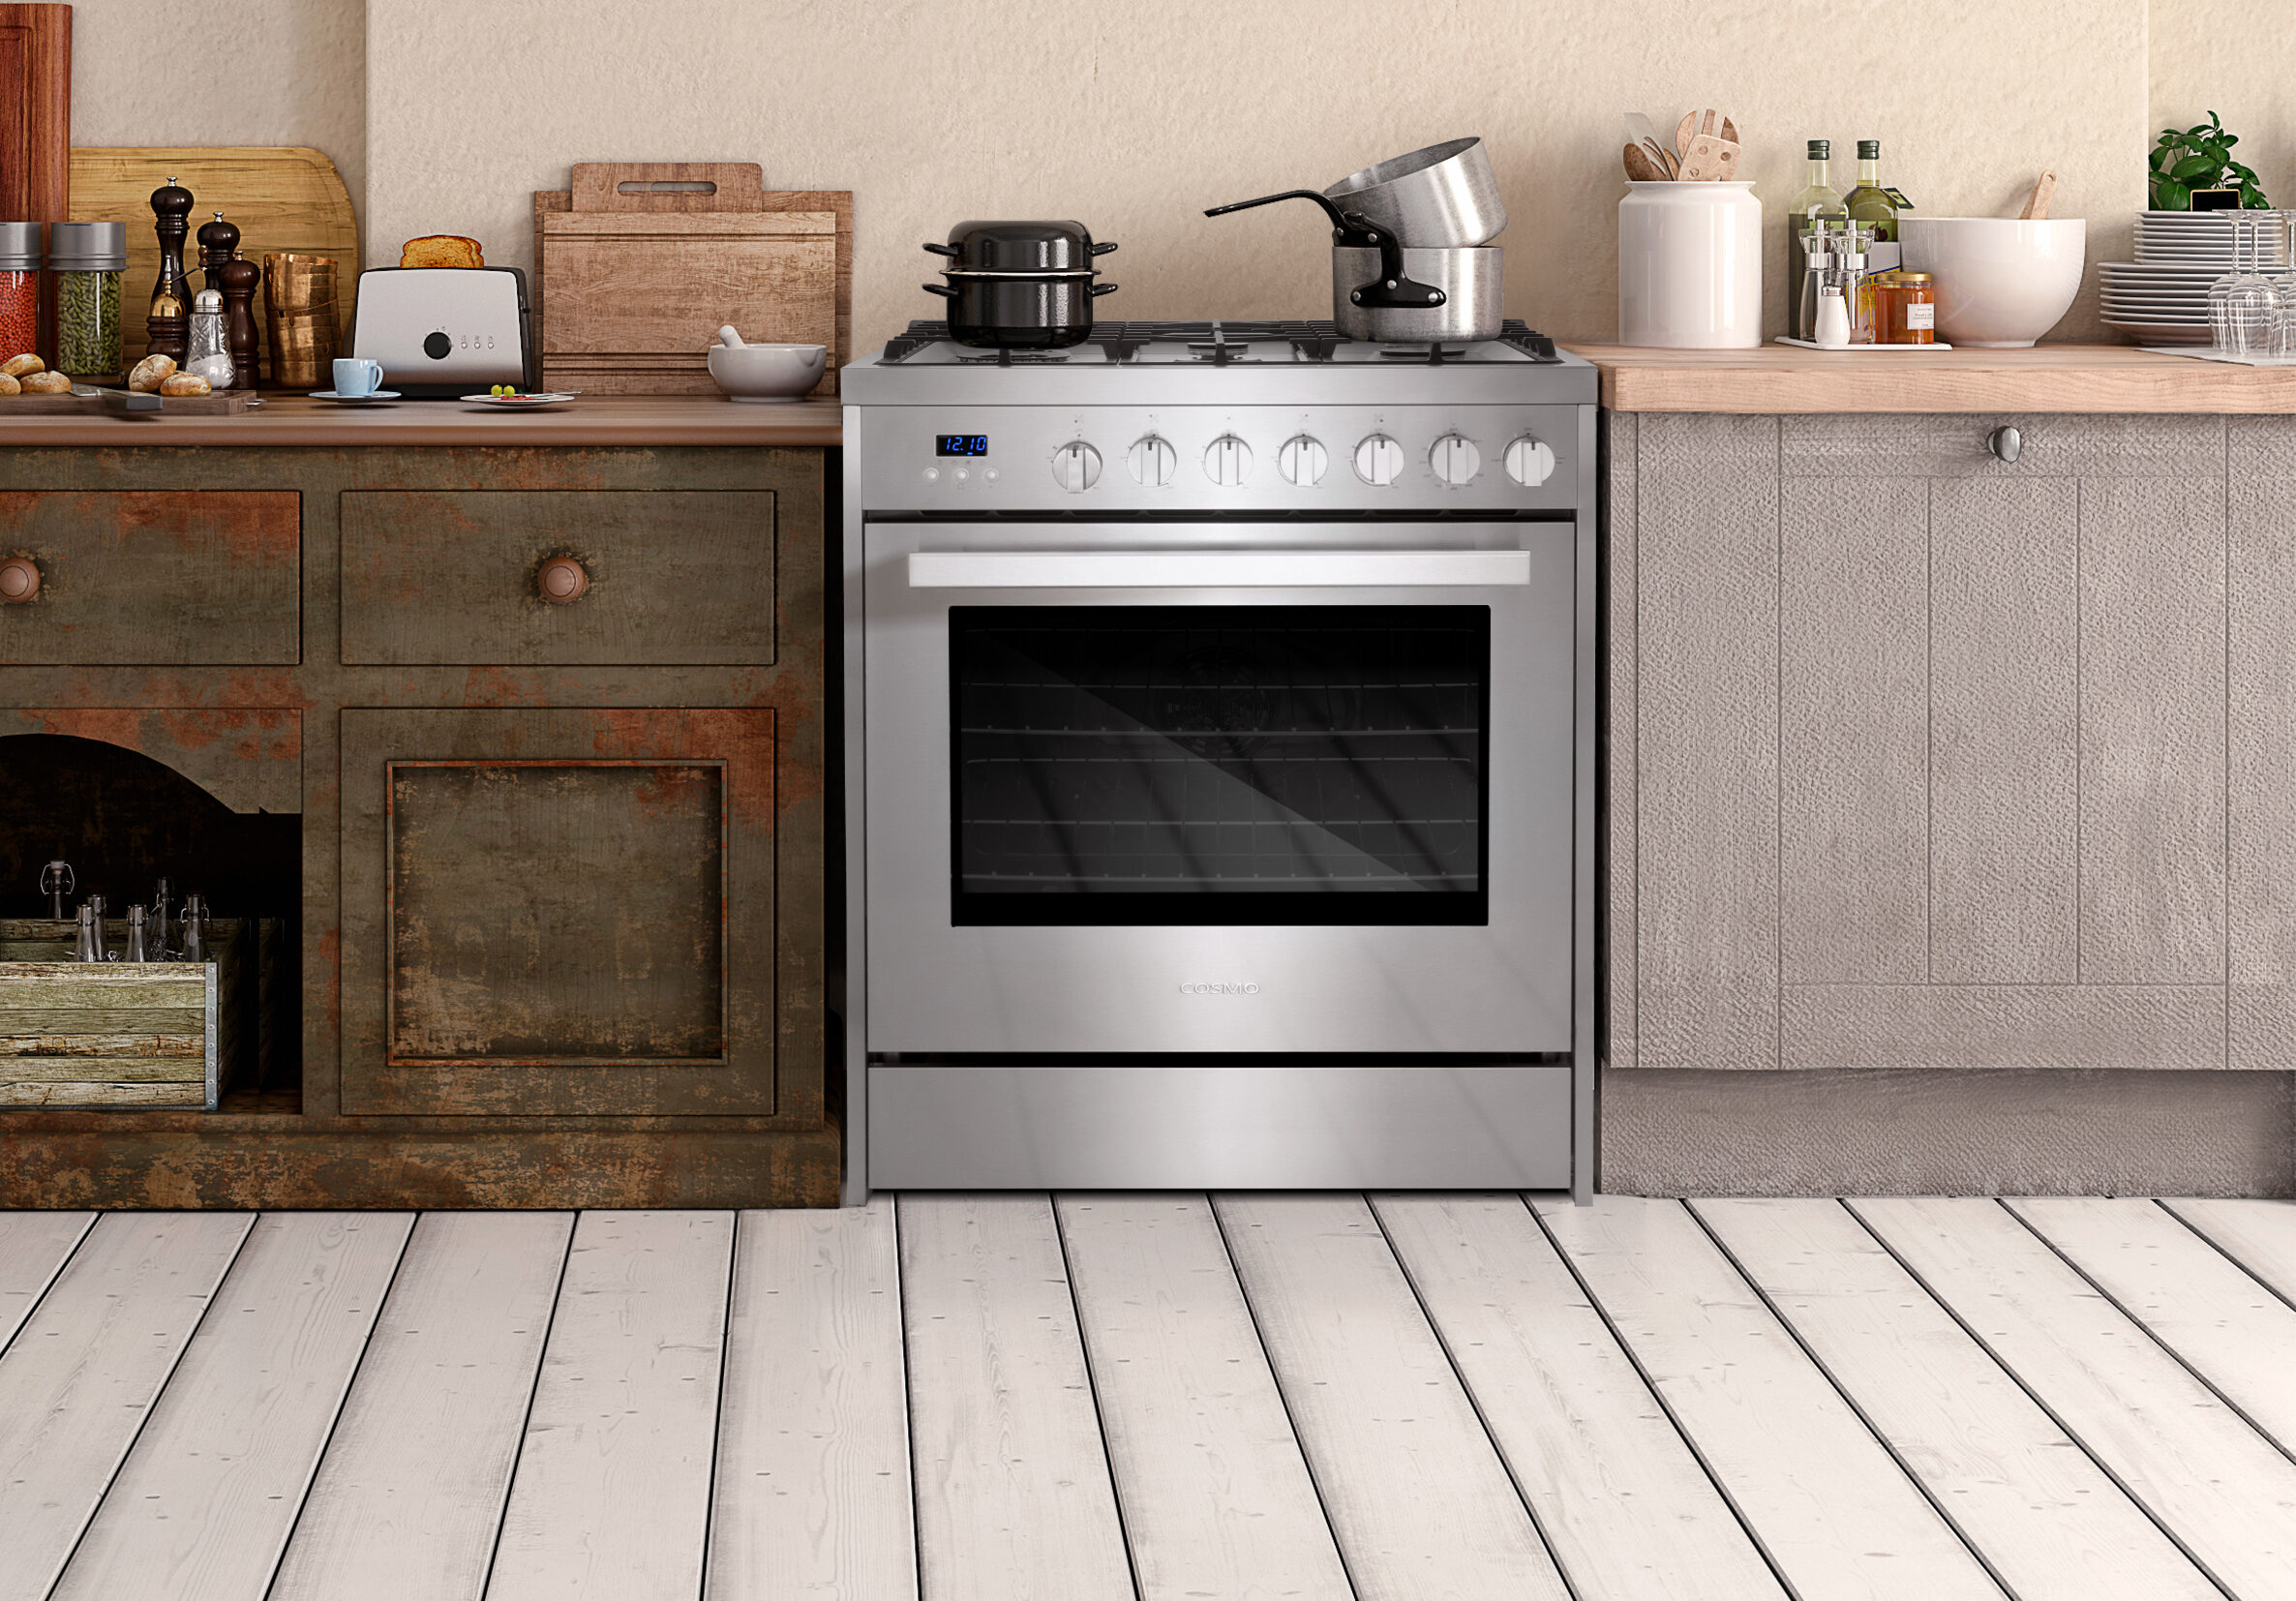 COSMO’s Upcoming Gas Range: The COS-305AGC